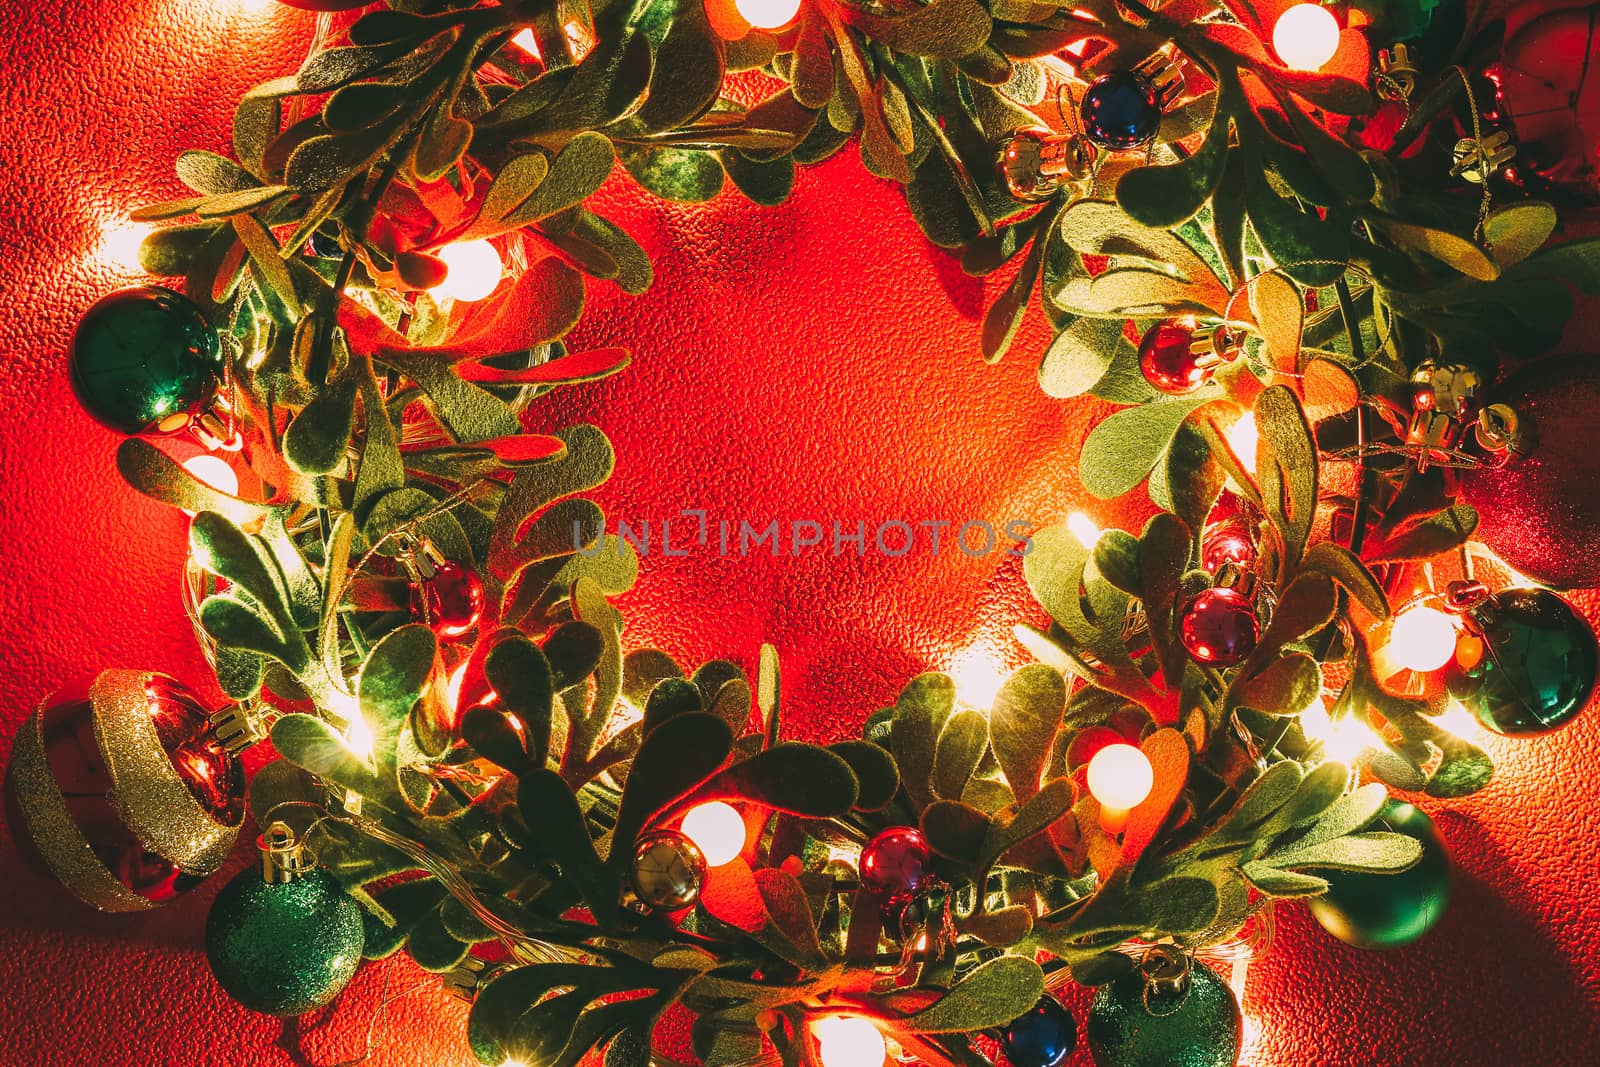 Greeting Season concept.Christmas wreath with decorative light on red background